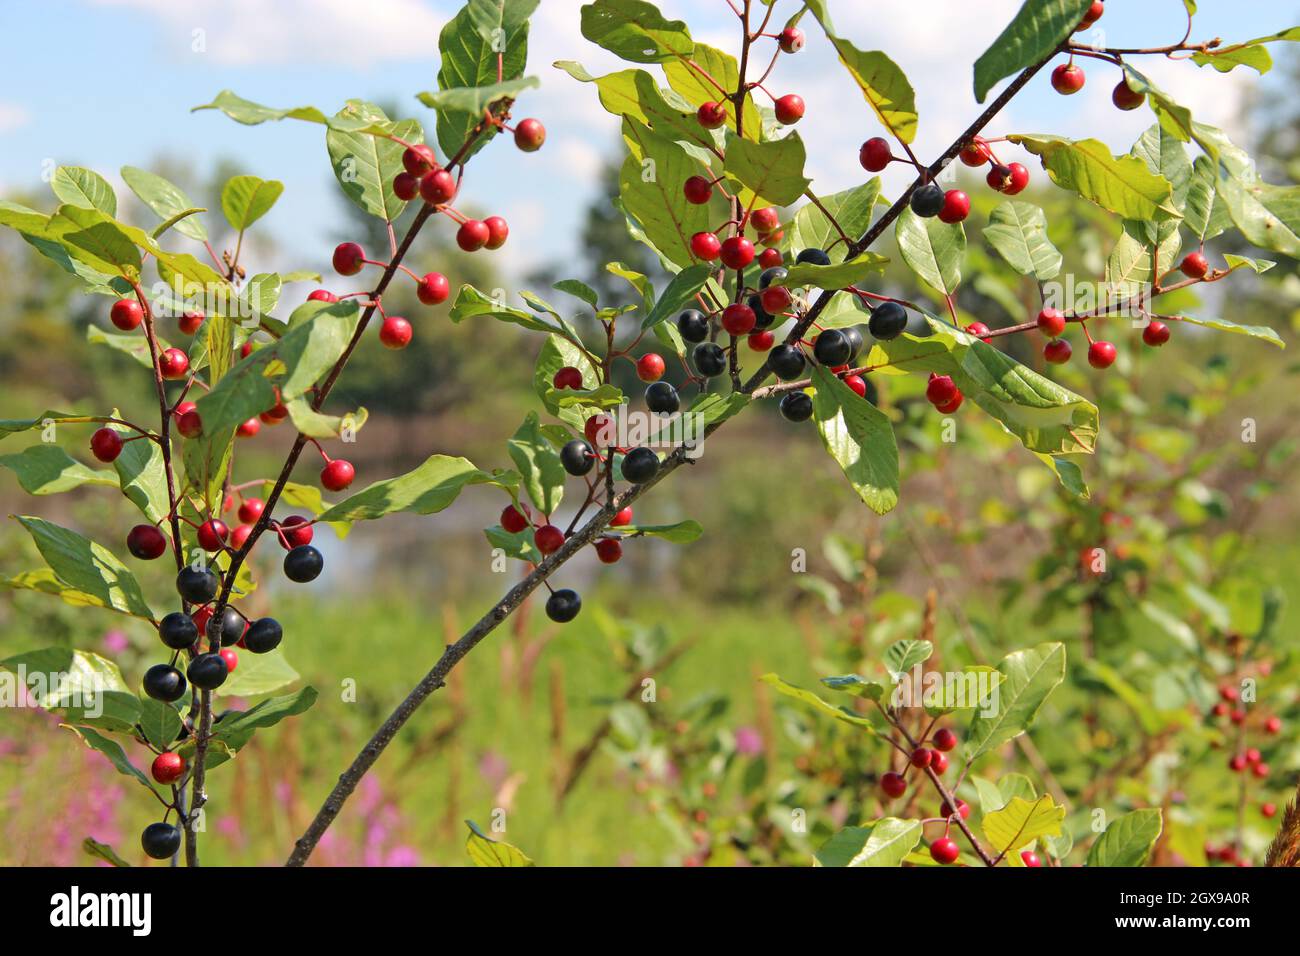 Branches of Frangula alnus with black and red berries. Fruits of Frangula alnus. Multicolored nature. Bright berries. Beautiful plant Stock Photo